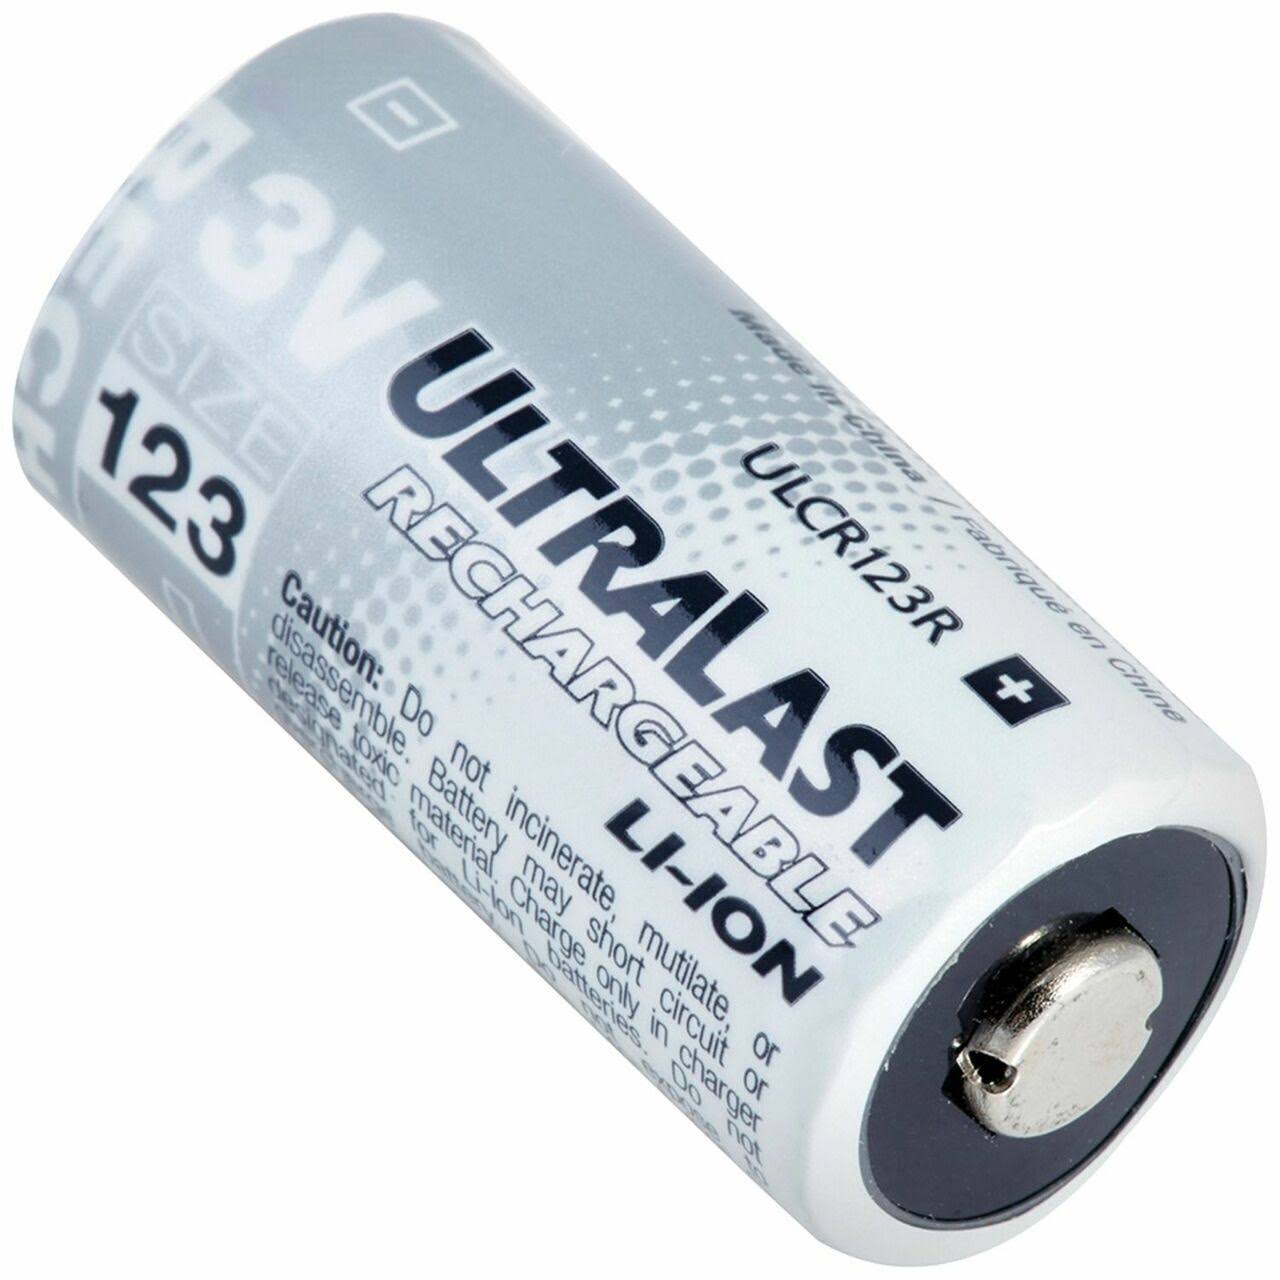 Dantona ULCR1213R1 Ulcr123r CR123 Rechargeable Replacement Battery